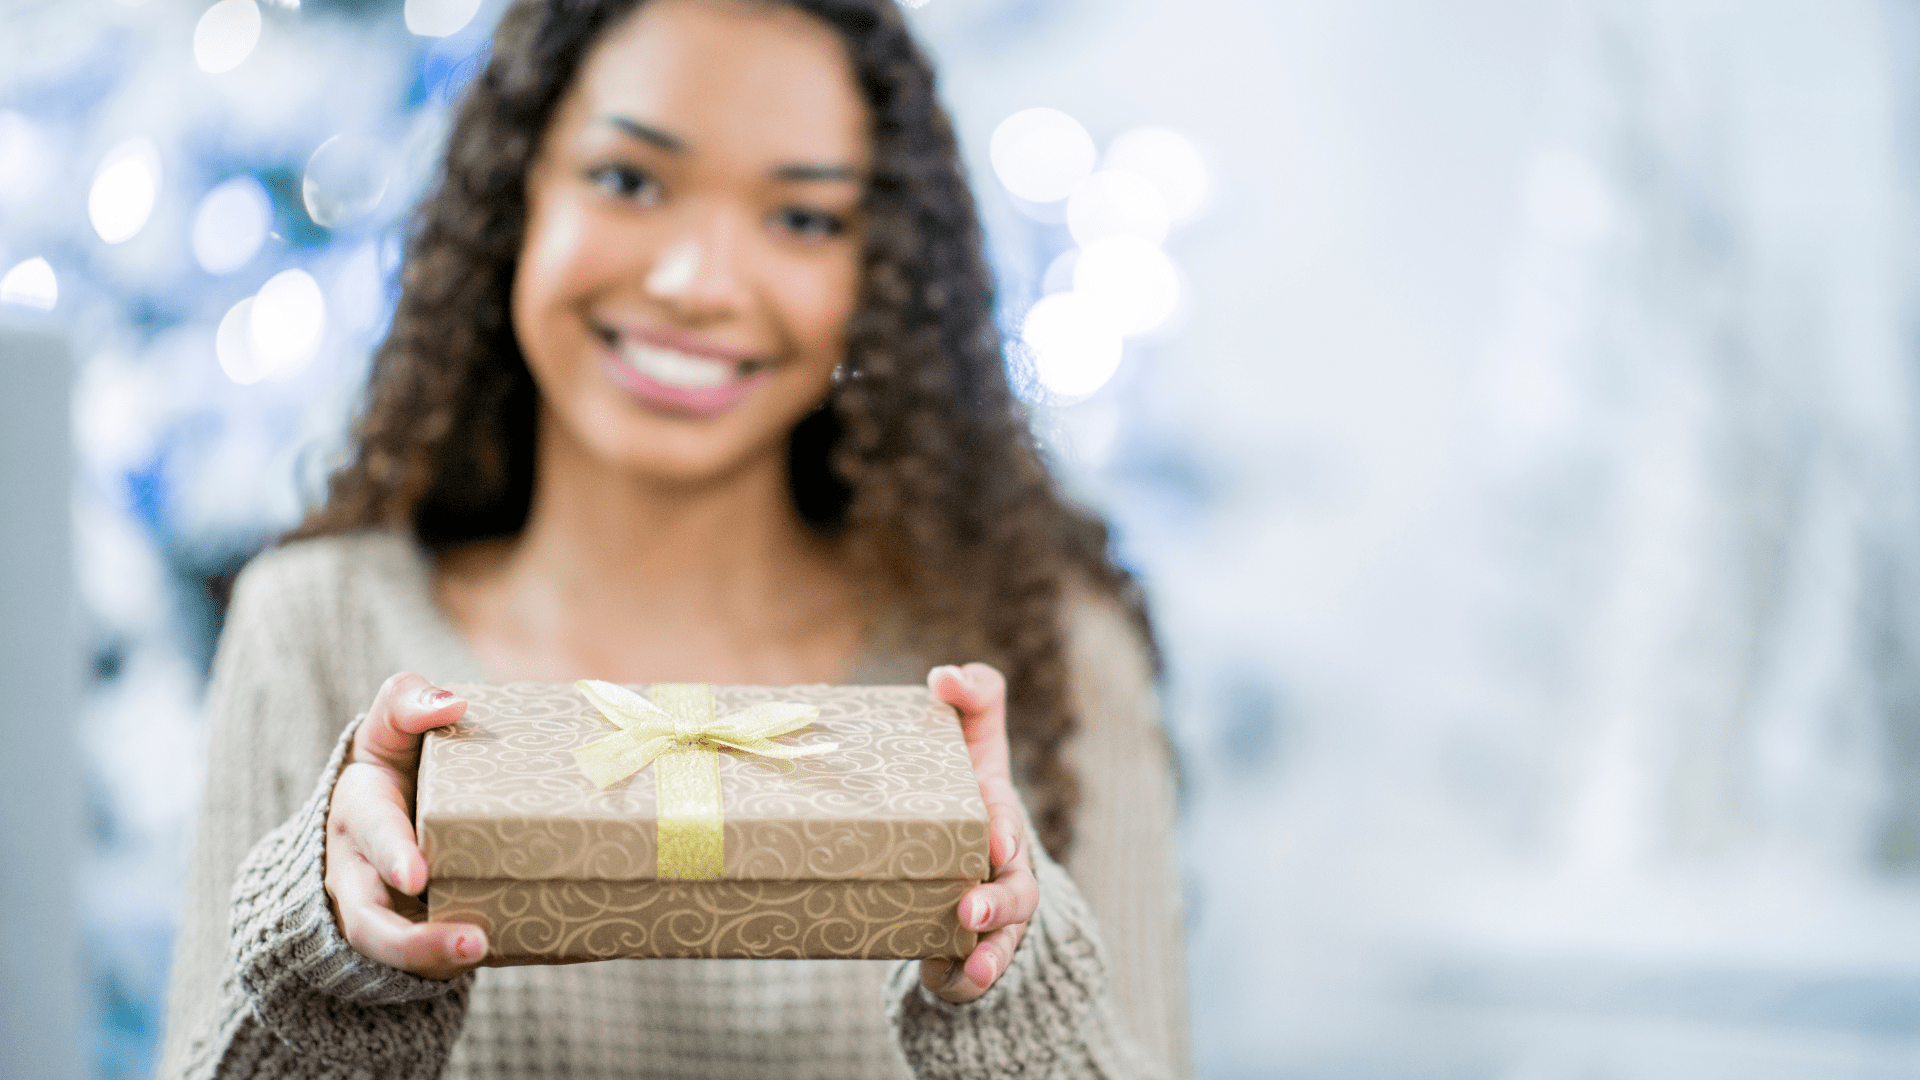 young woman offering gift for therapist in a holiday setting